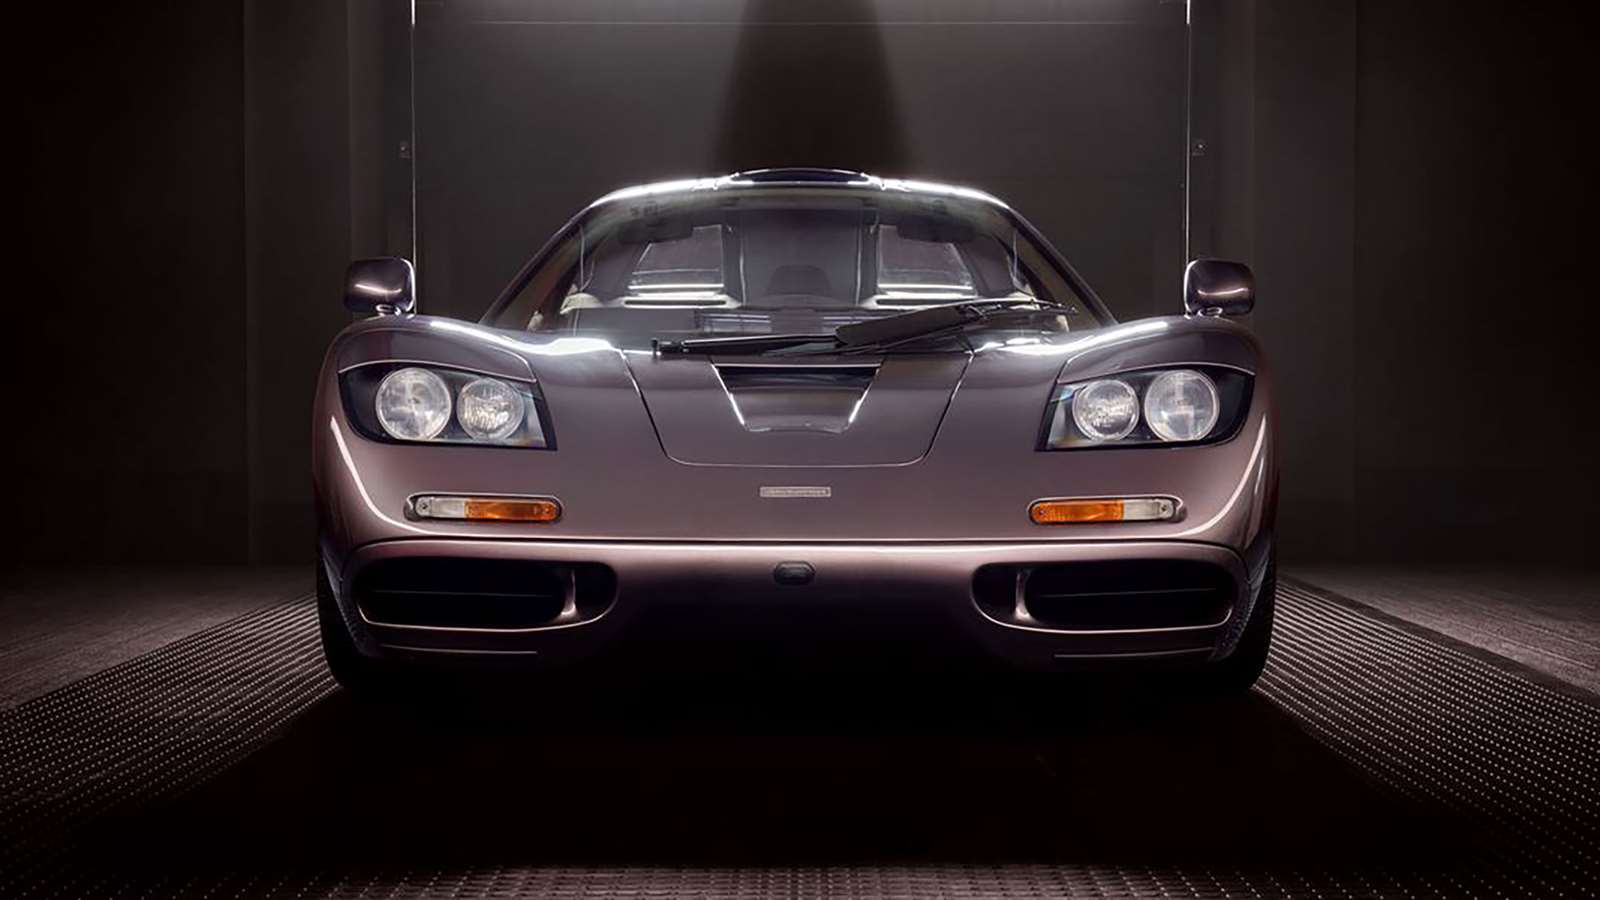 Virtually new McLaren F1 up for auction